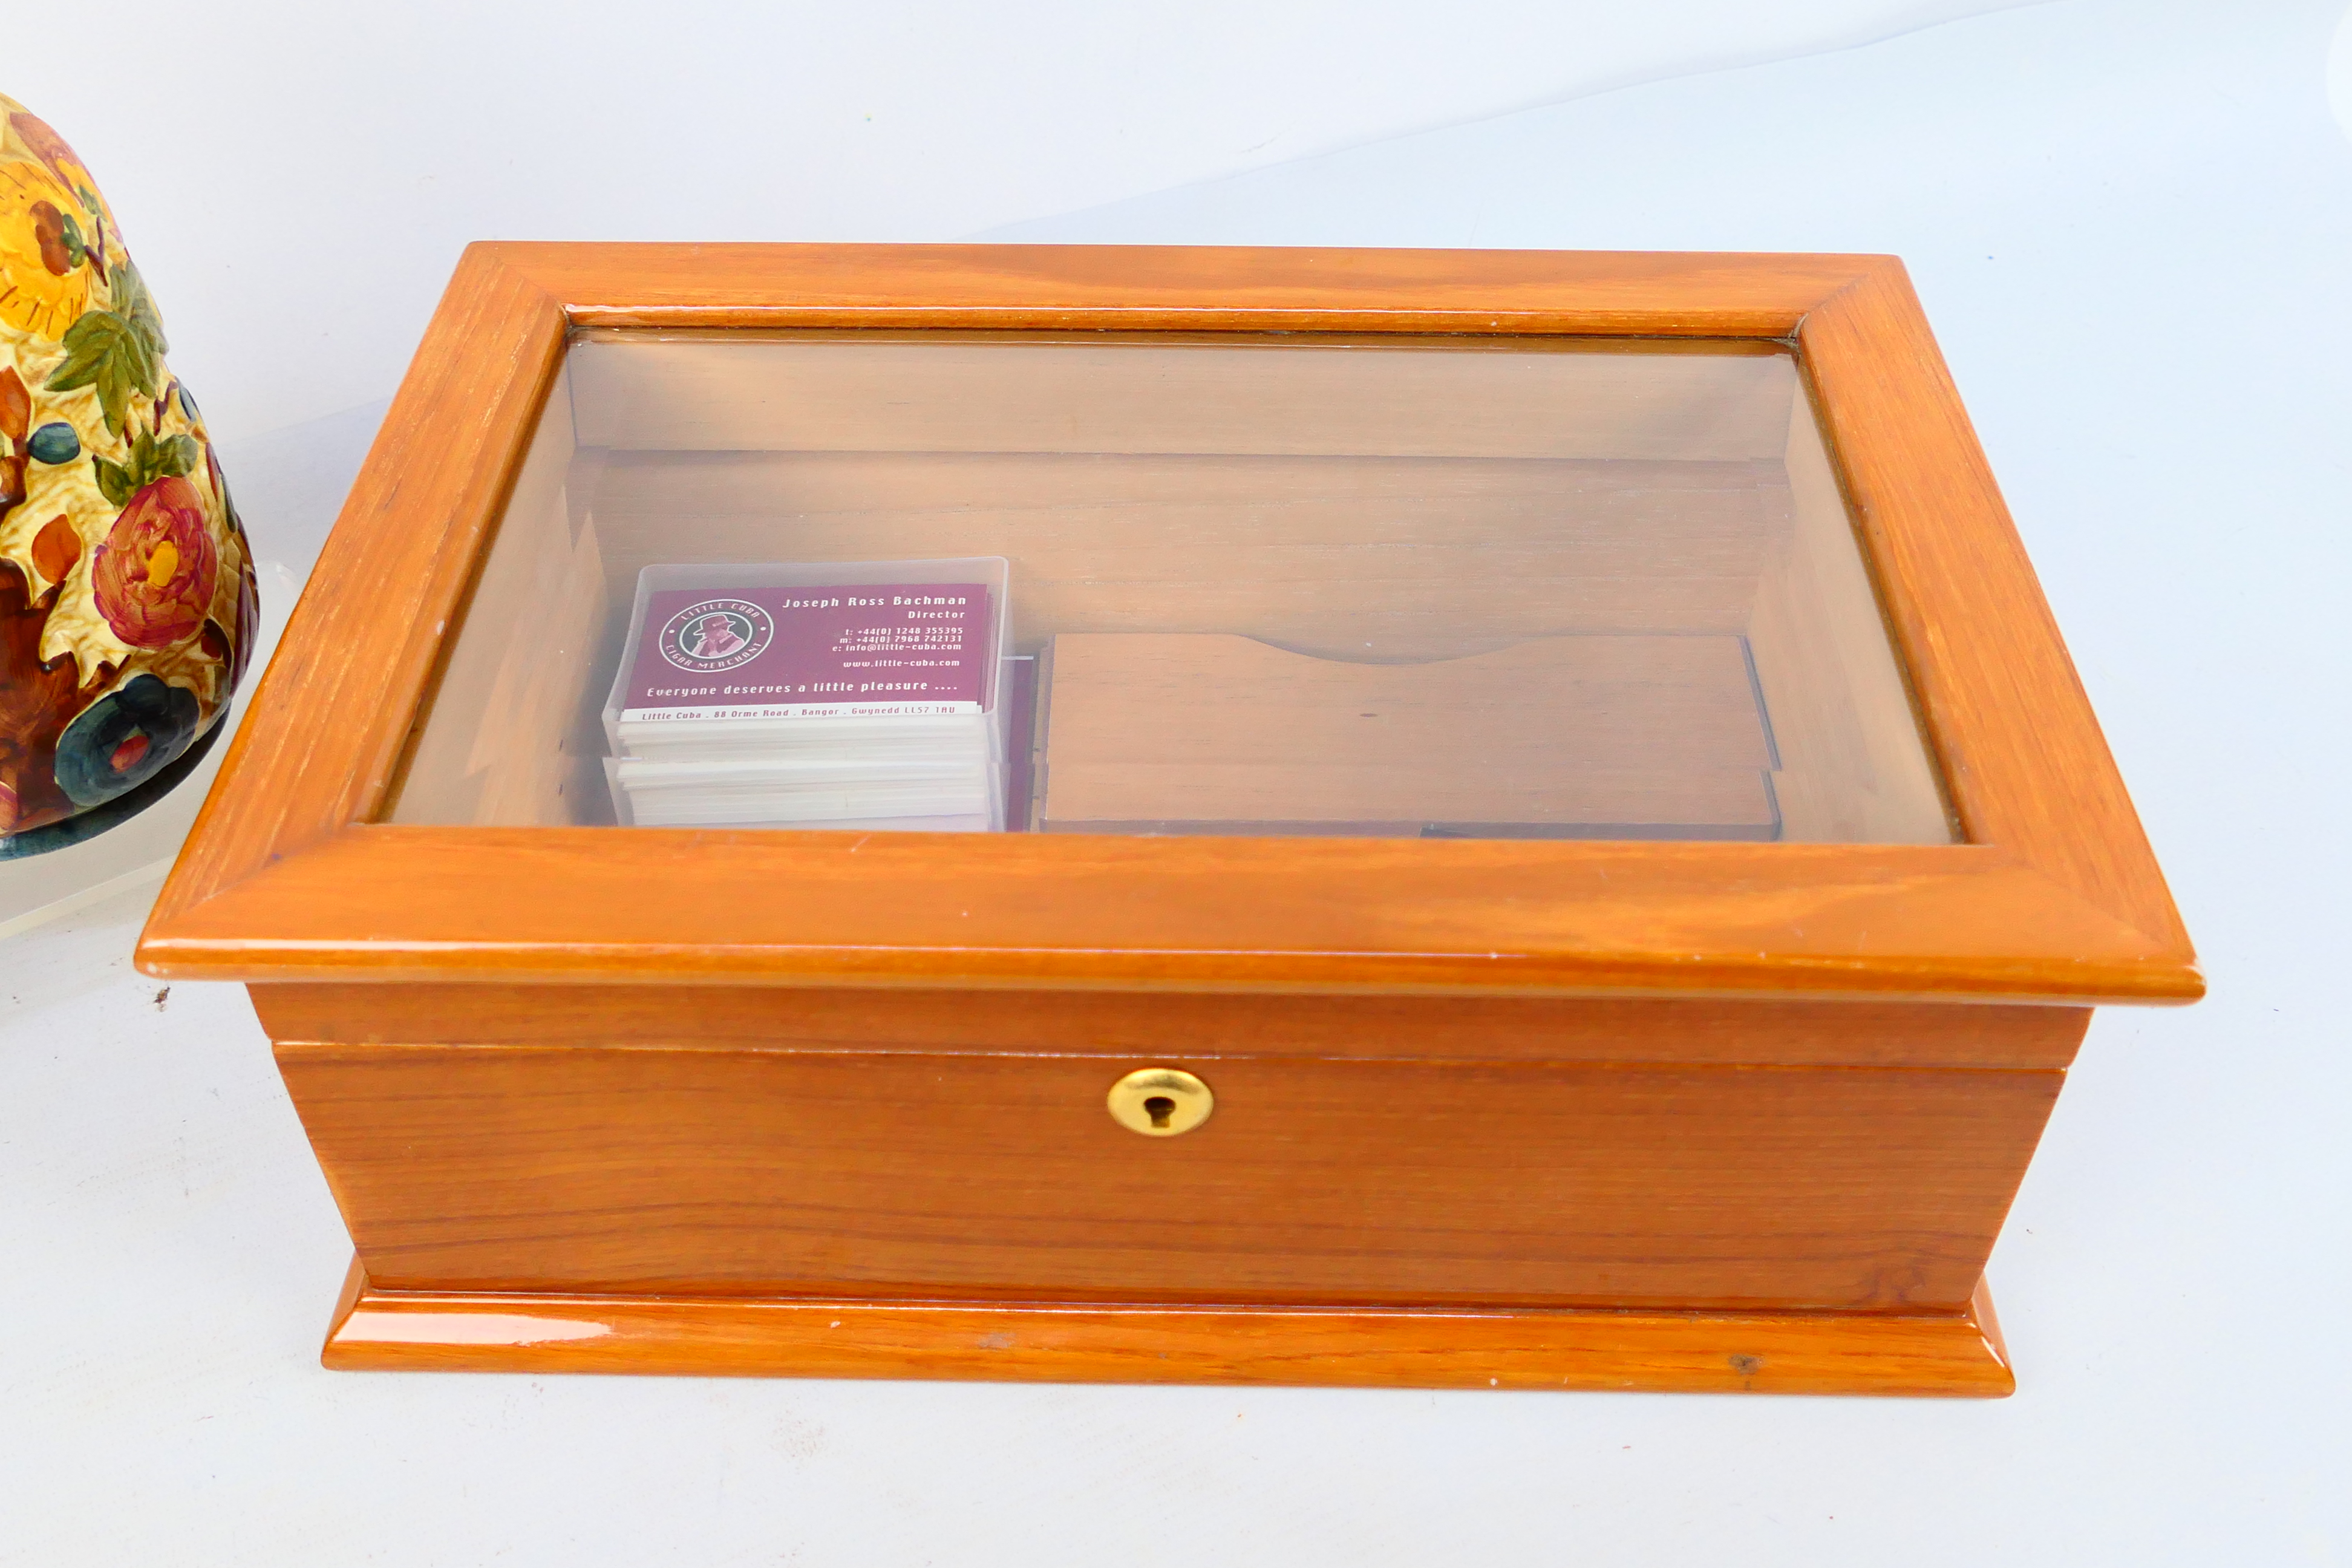 Lot to include a glass top cigar humidor, 14 cm x 36 cm x 24 cm and two H Wood Indian Tree vases. - Image 6 of 6